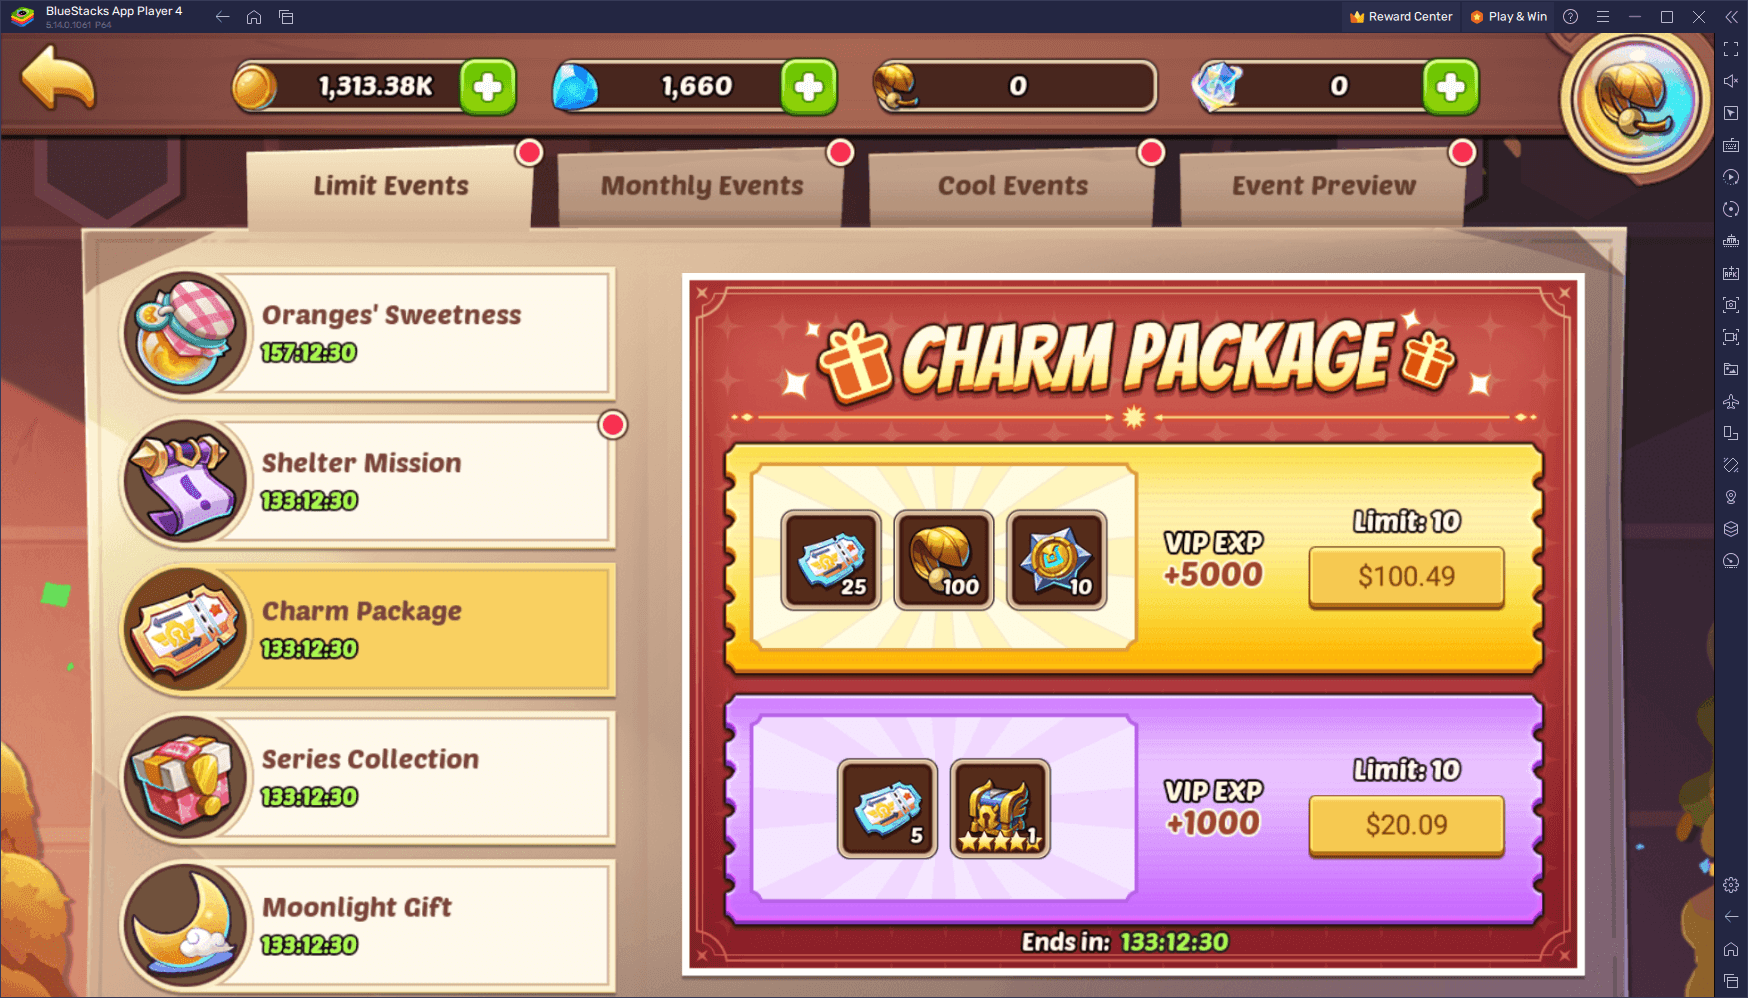 Idle Heroes Update Event - Daily Rewards, Missions, and More!